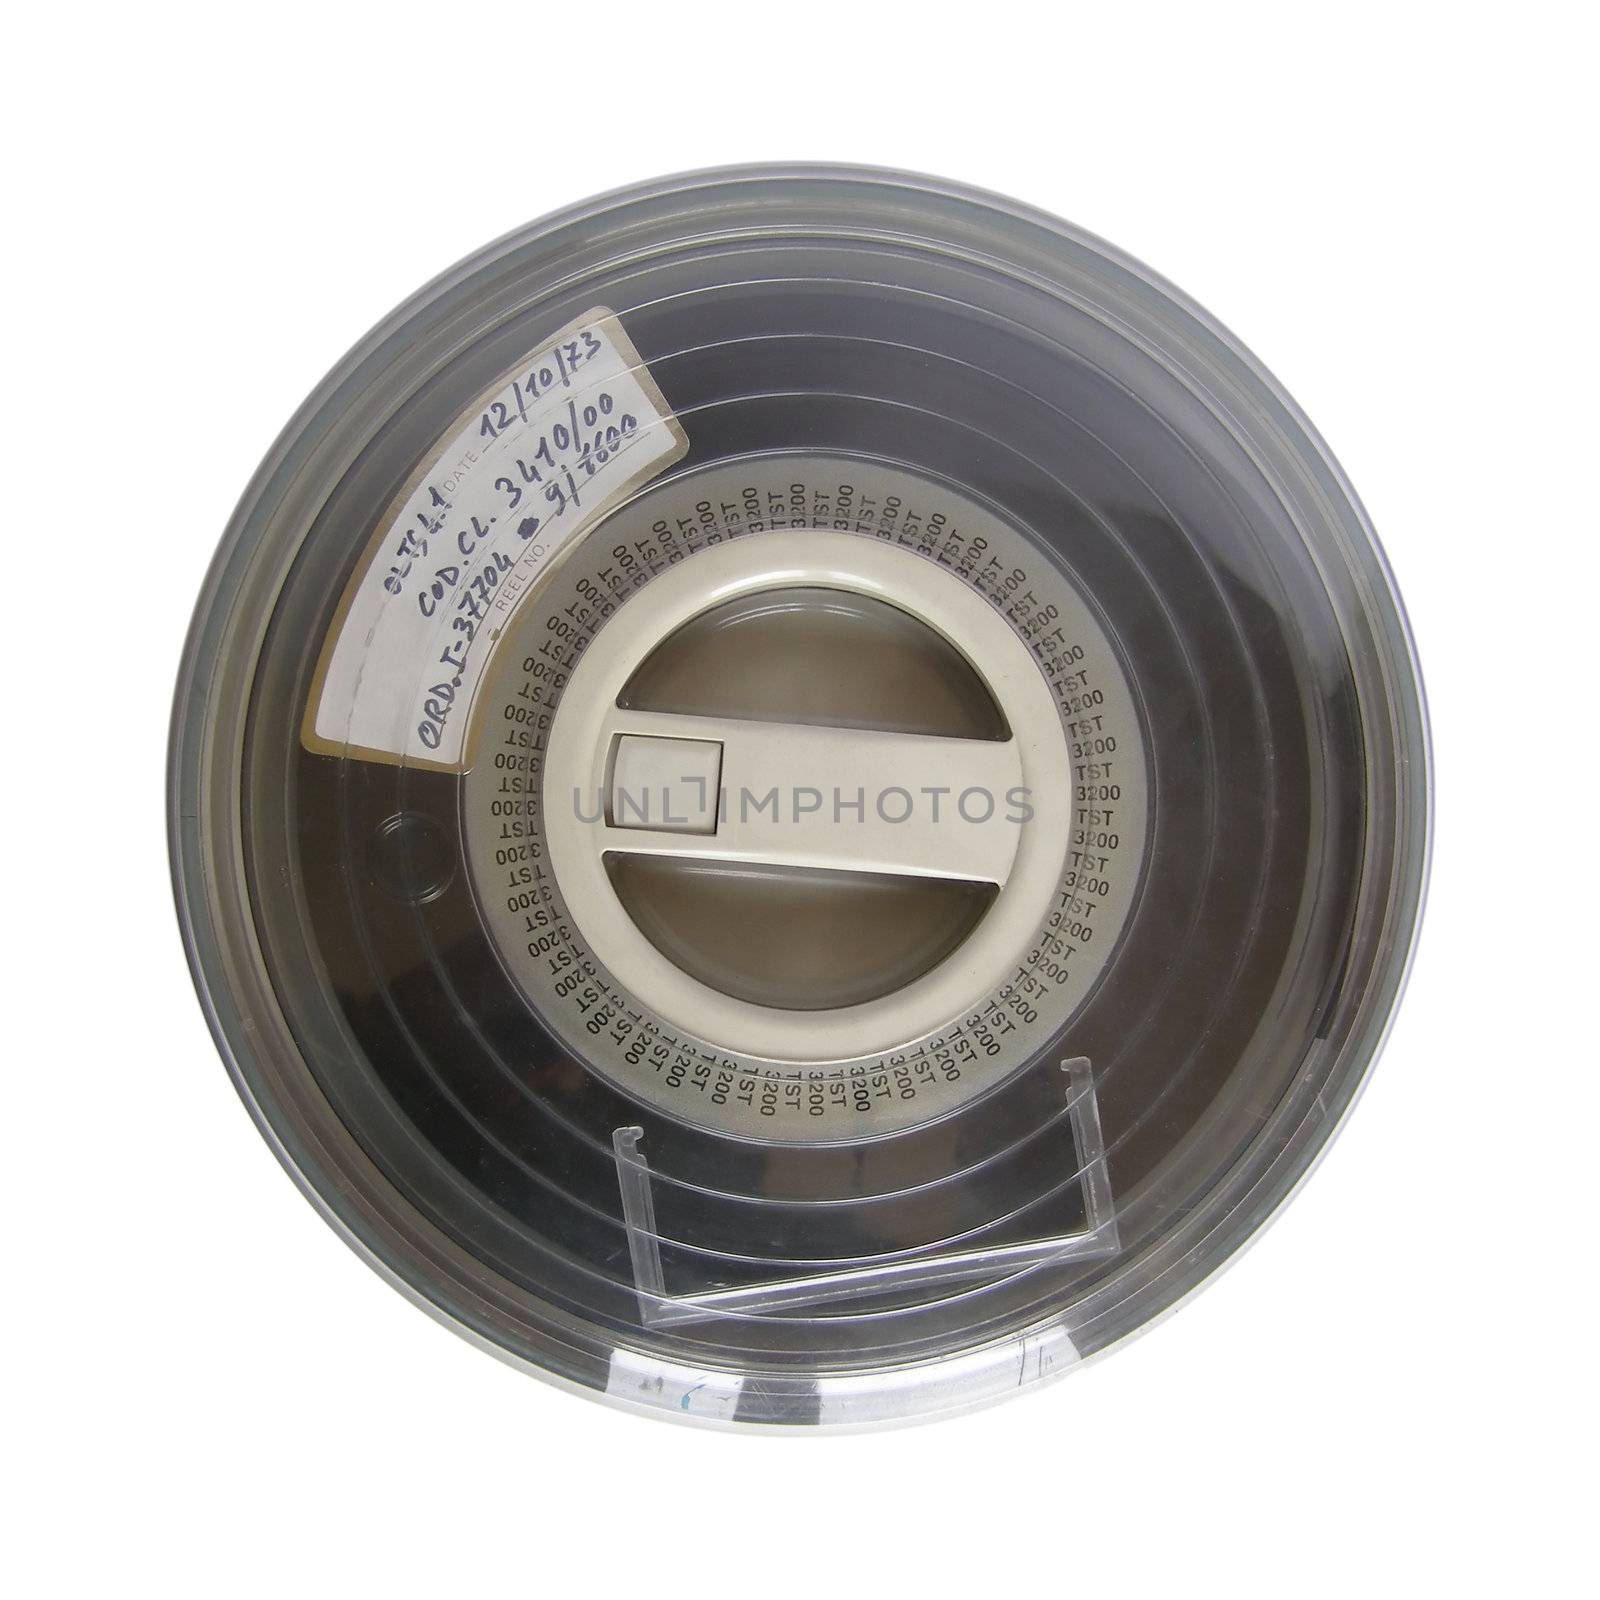 Magnetic tape reel for computer data storage